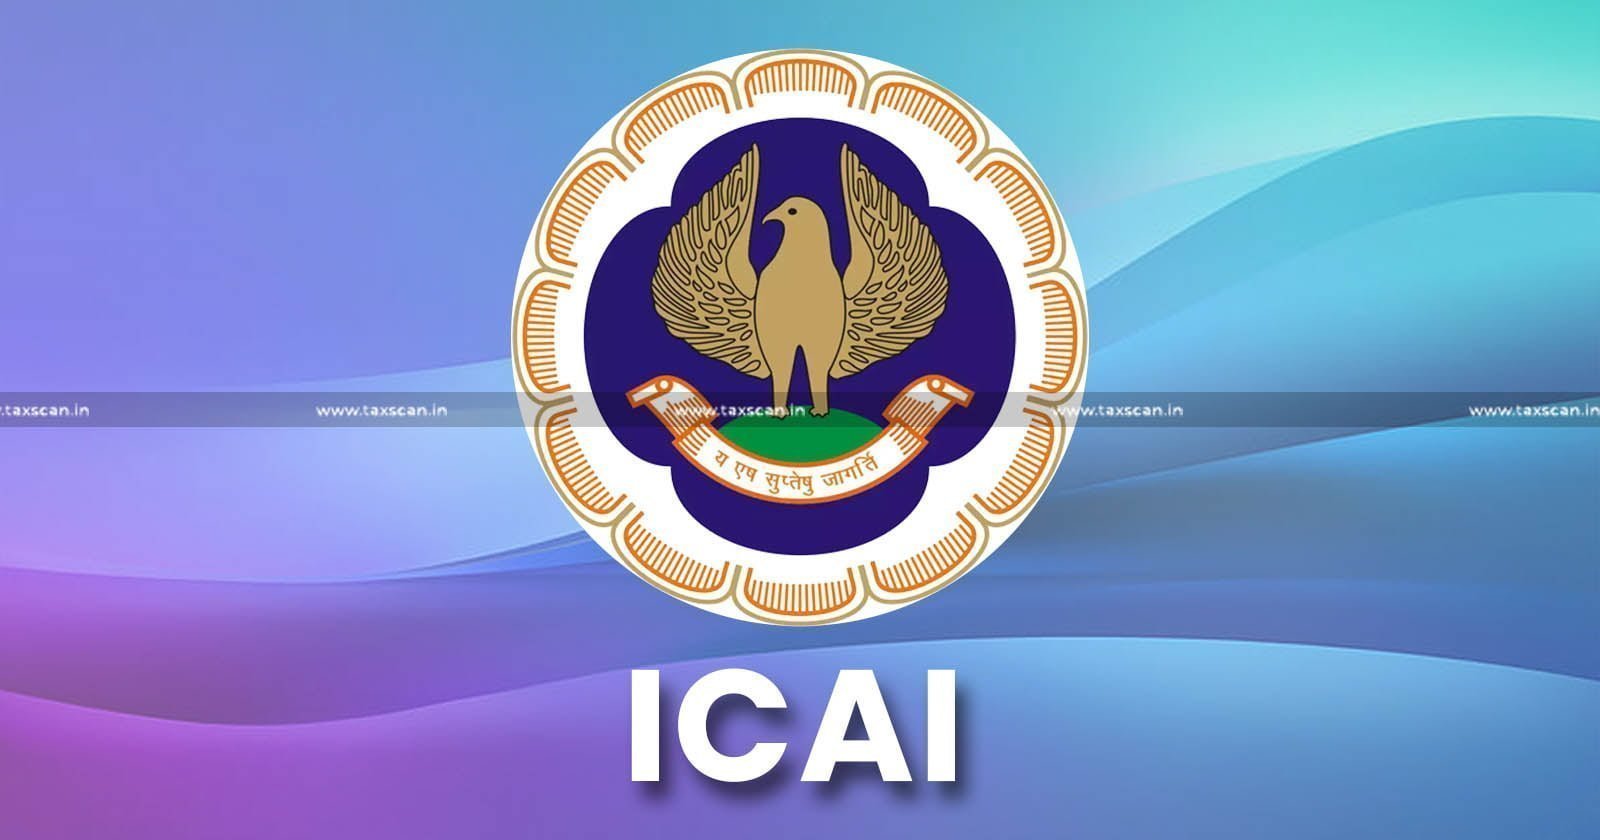 ICAI CA New Syllabus - ICAI - CA - CA New Syllabus - Know Complete Details about Integrated Course on Information Technology and Soft Skills - ICITSS - Advanced ICITSS and Self-Paced Online Modules - Taxscan